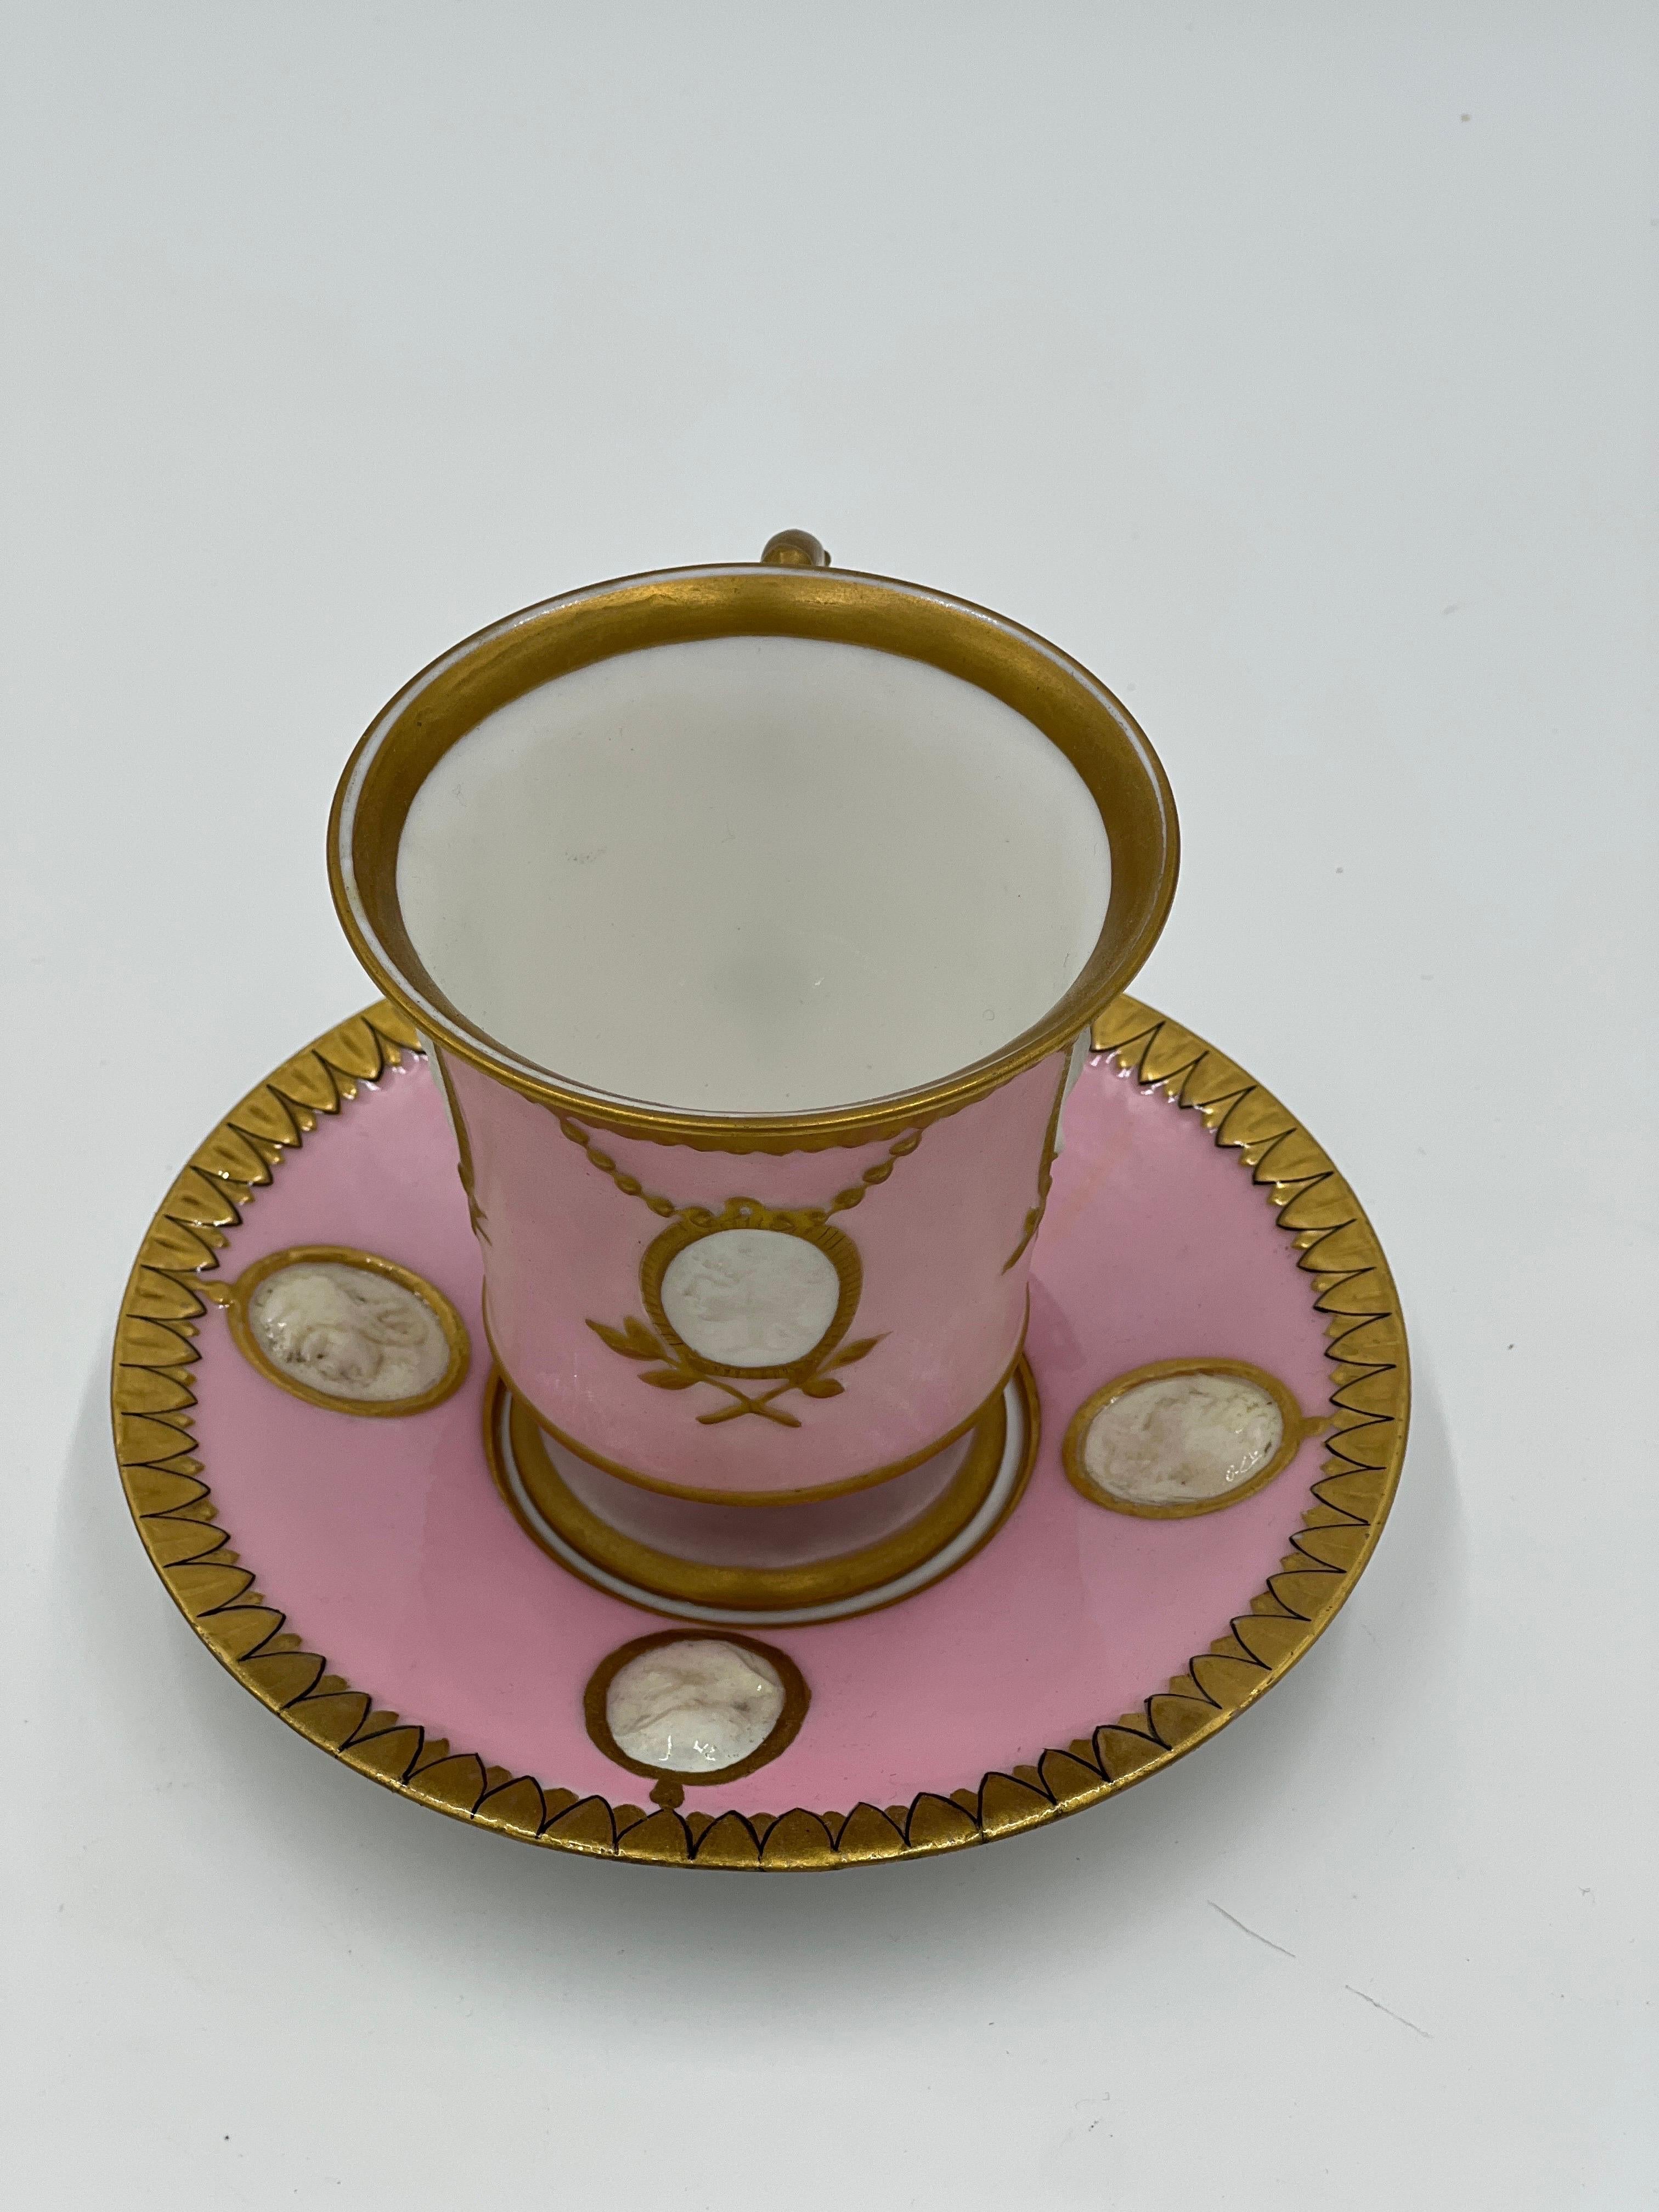 Rare Old Paris Empire Style Classical Teacup & Saucer w/ Bisque Faces & Ram Head For Sale 5